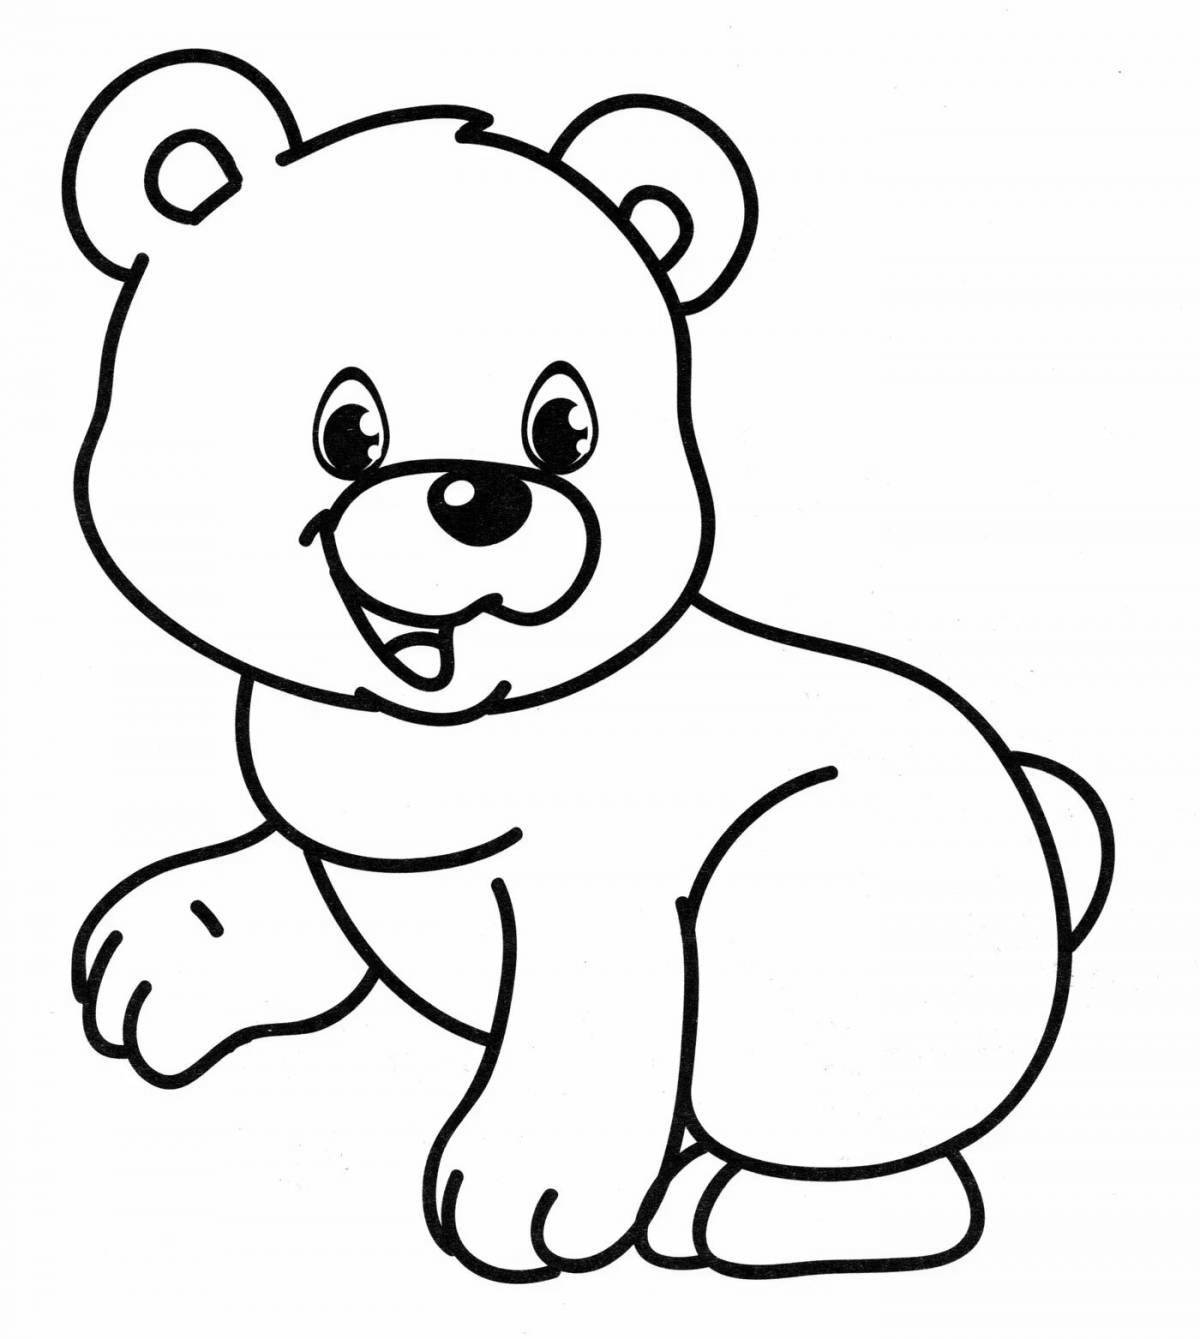 Delightful coloring bear for children 5-6 years old